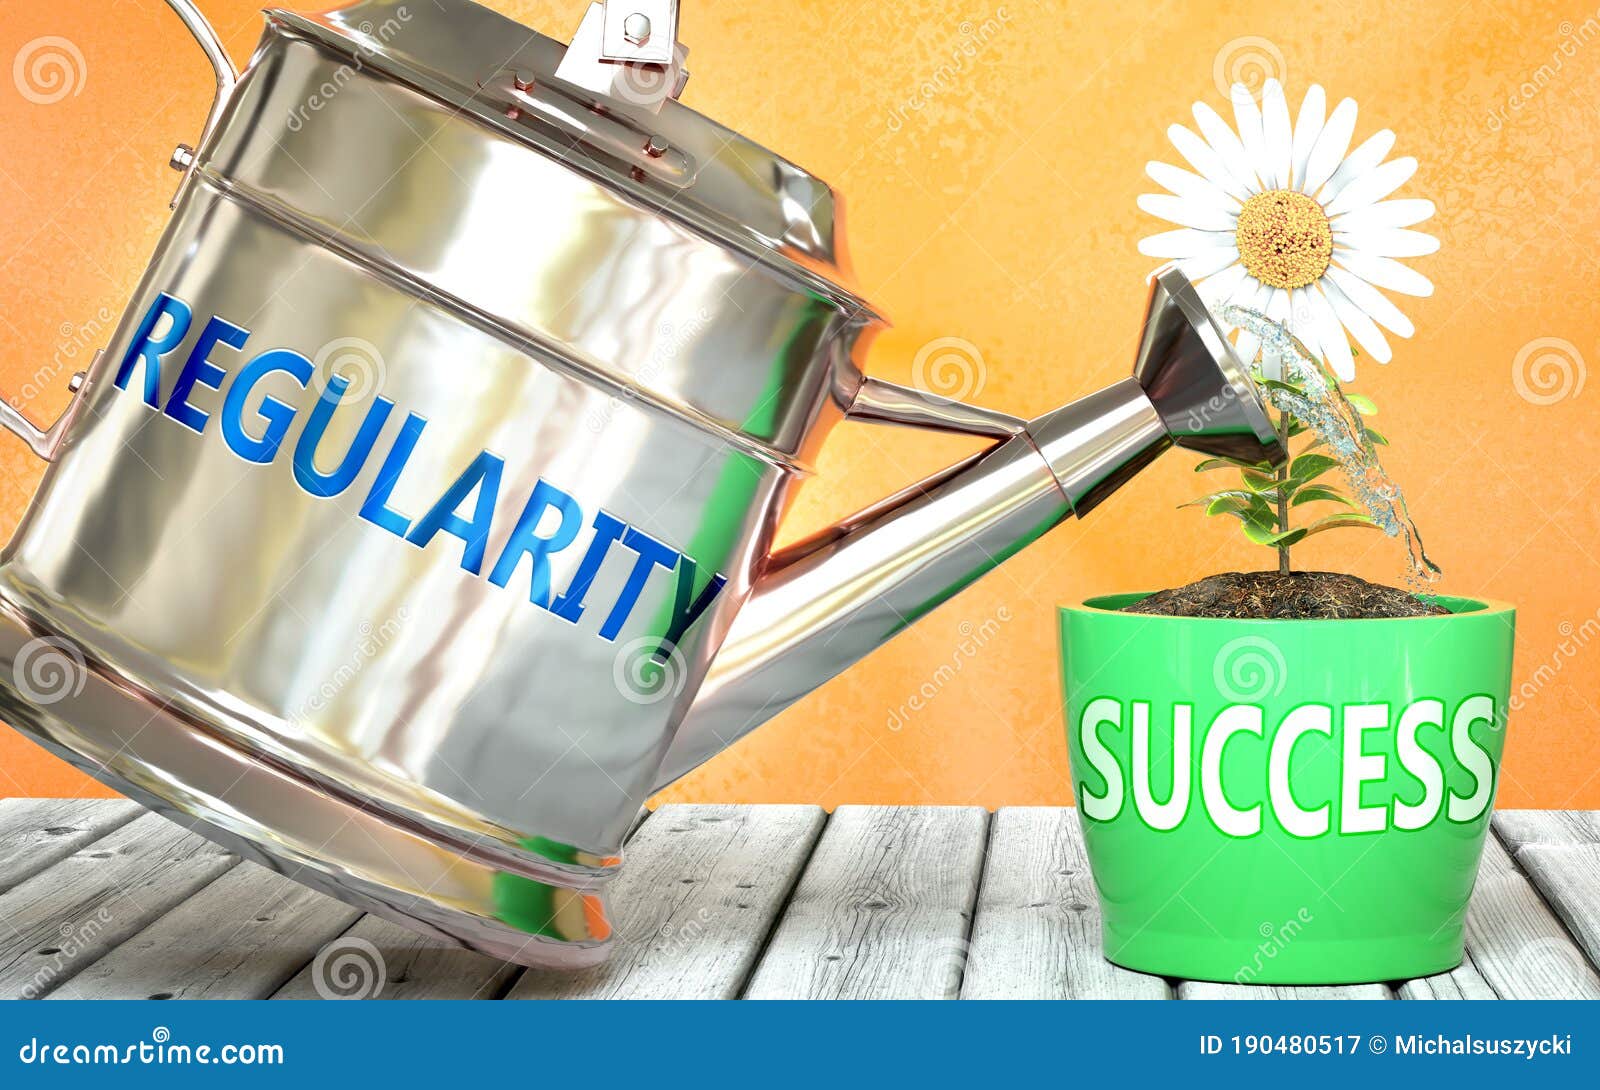 regularity helps achieving success - pictured as word regularity on a watering can to ize that regularity makes success grow